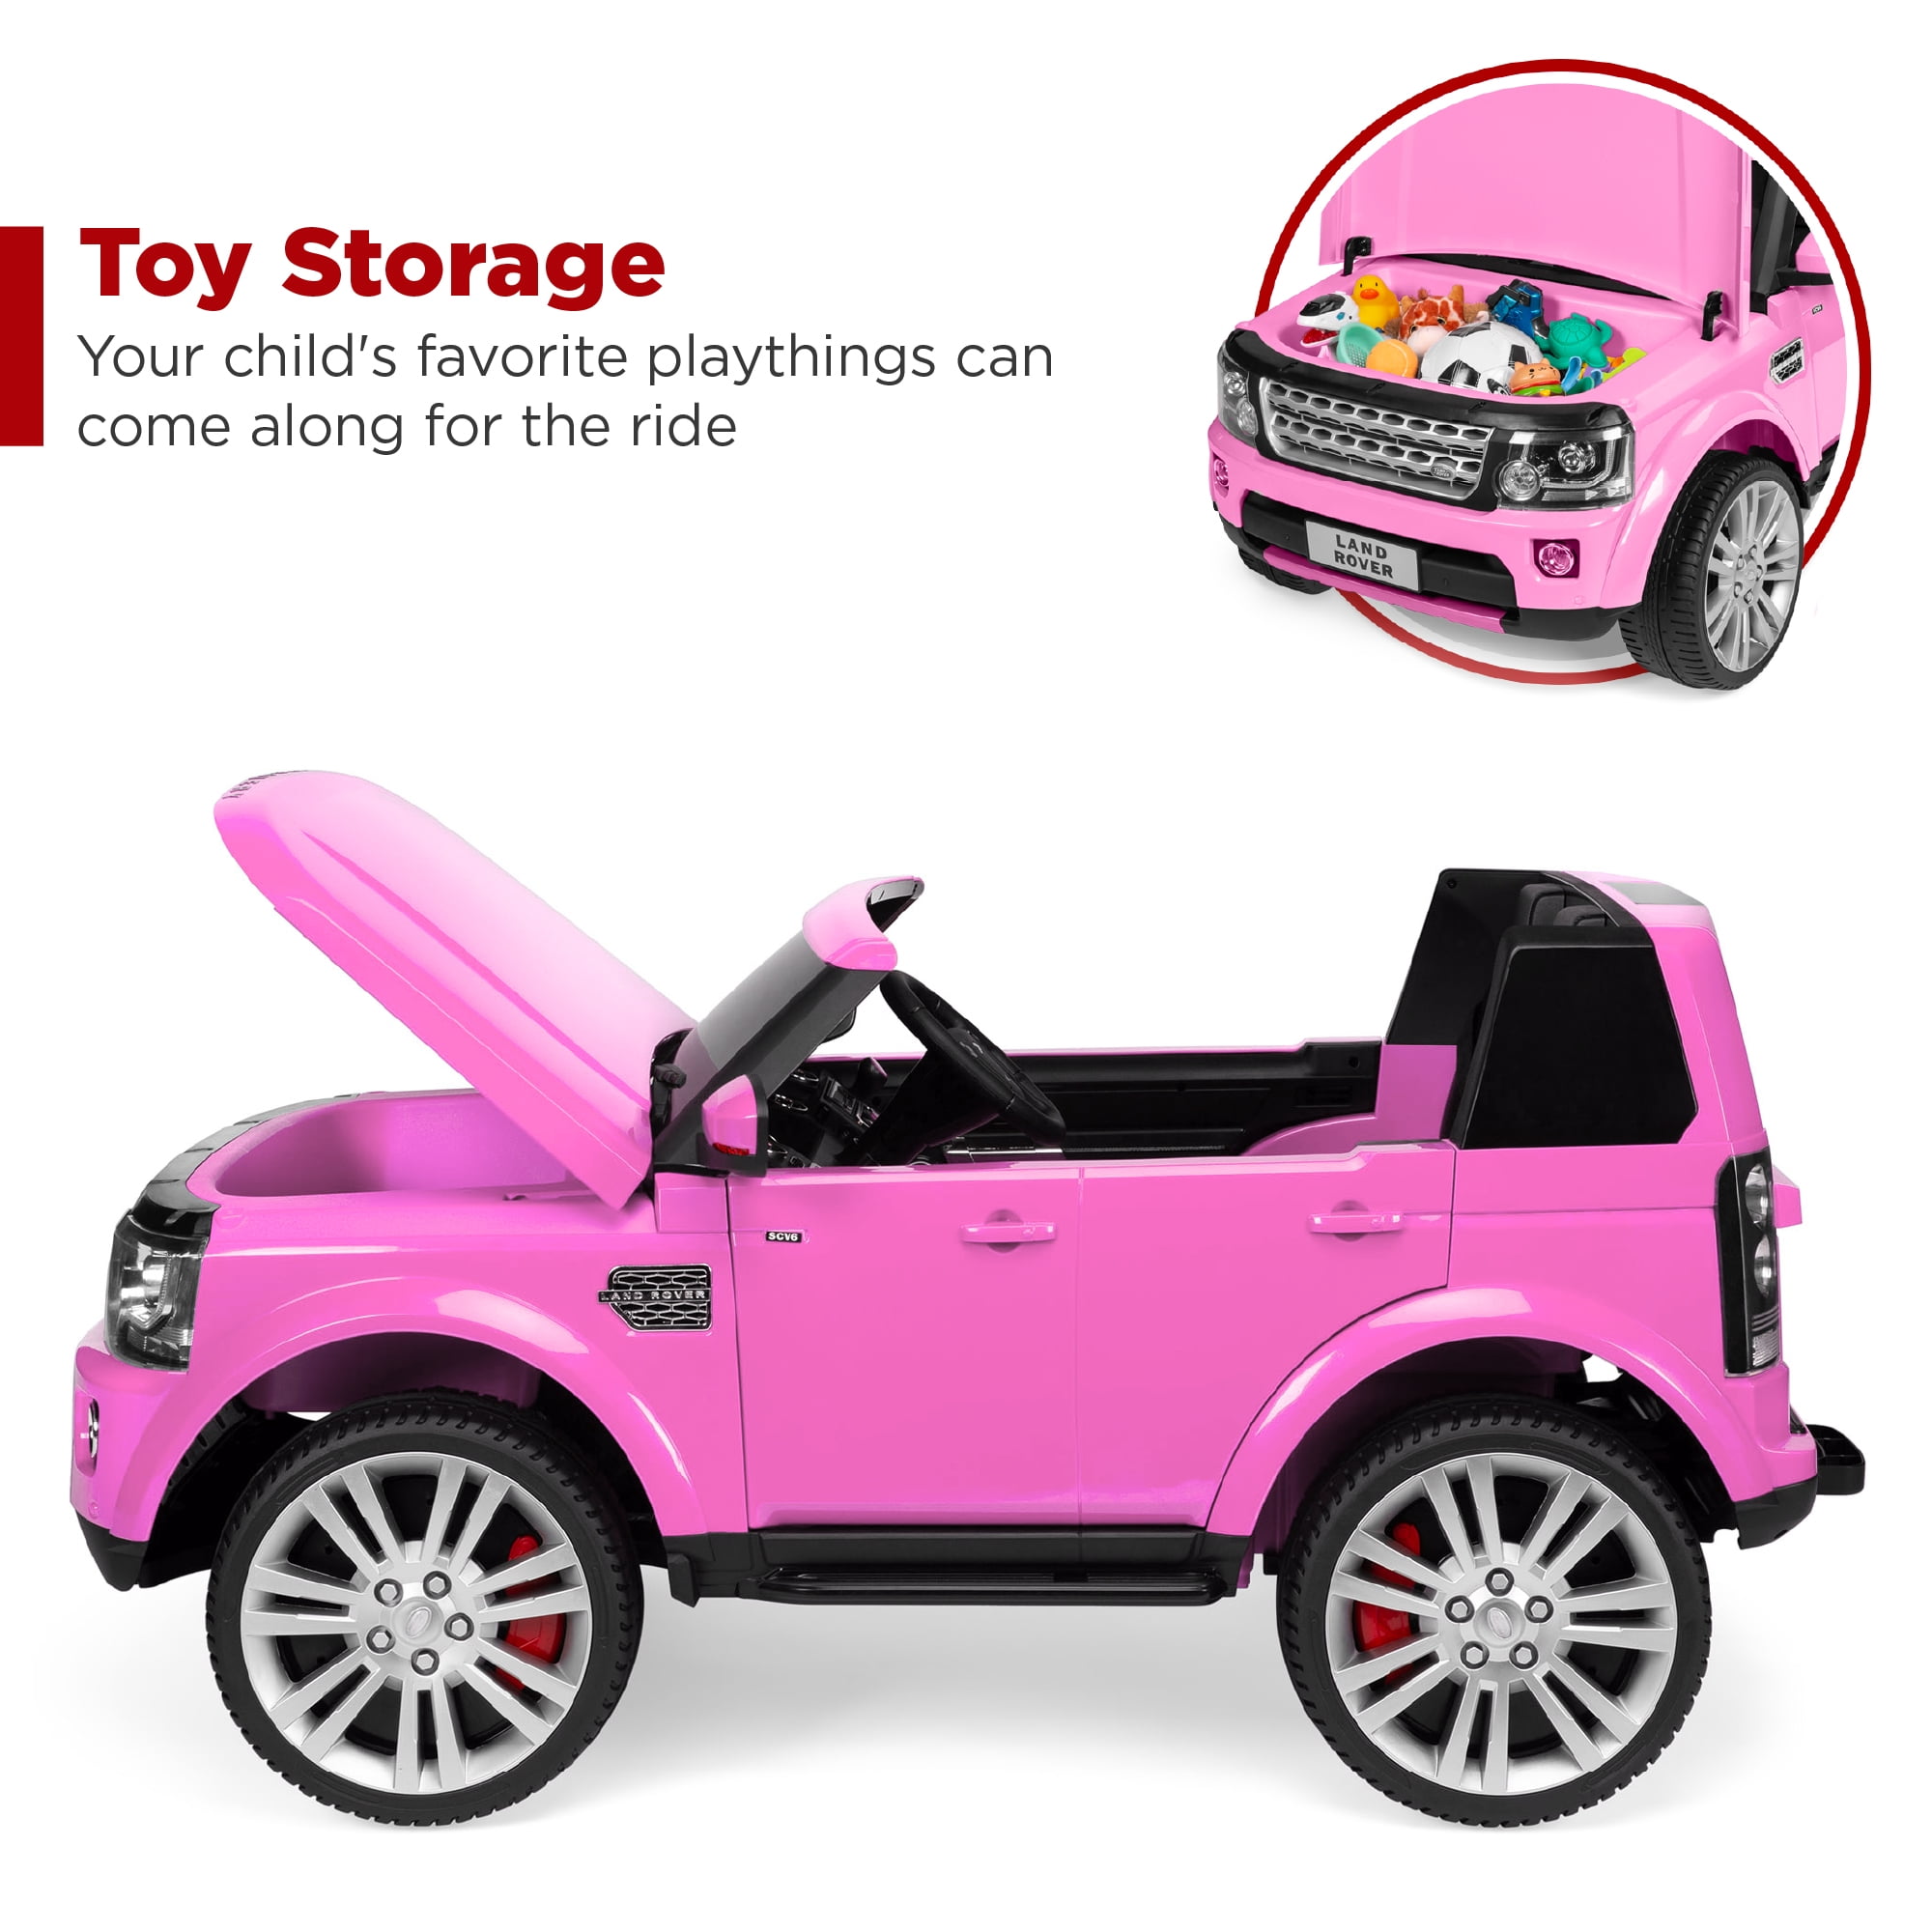 Best Choice Products 12V 3.7 MPH 2-Seater Licensed Land Rover Ride On Car Toy w/ Parent Remote Control - Pink - 2